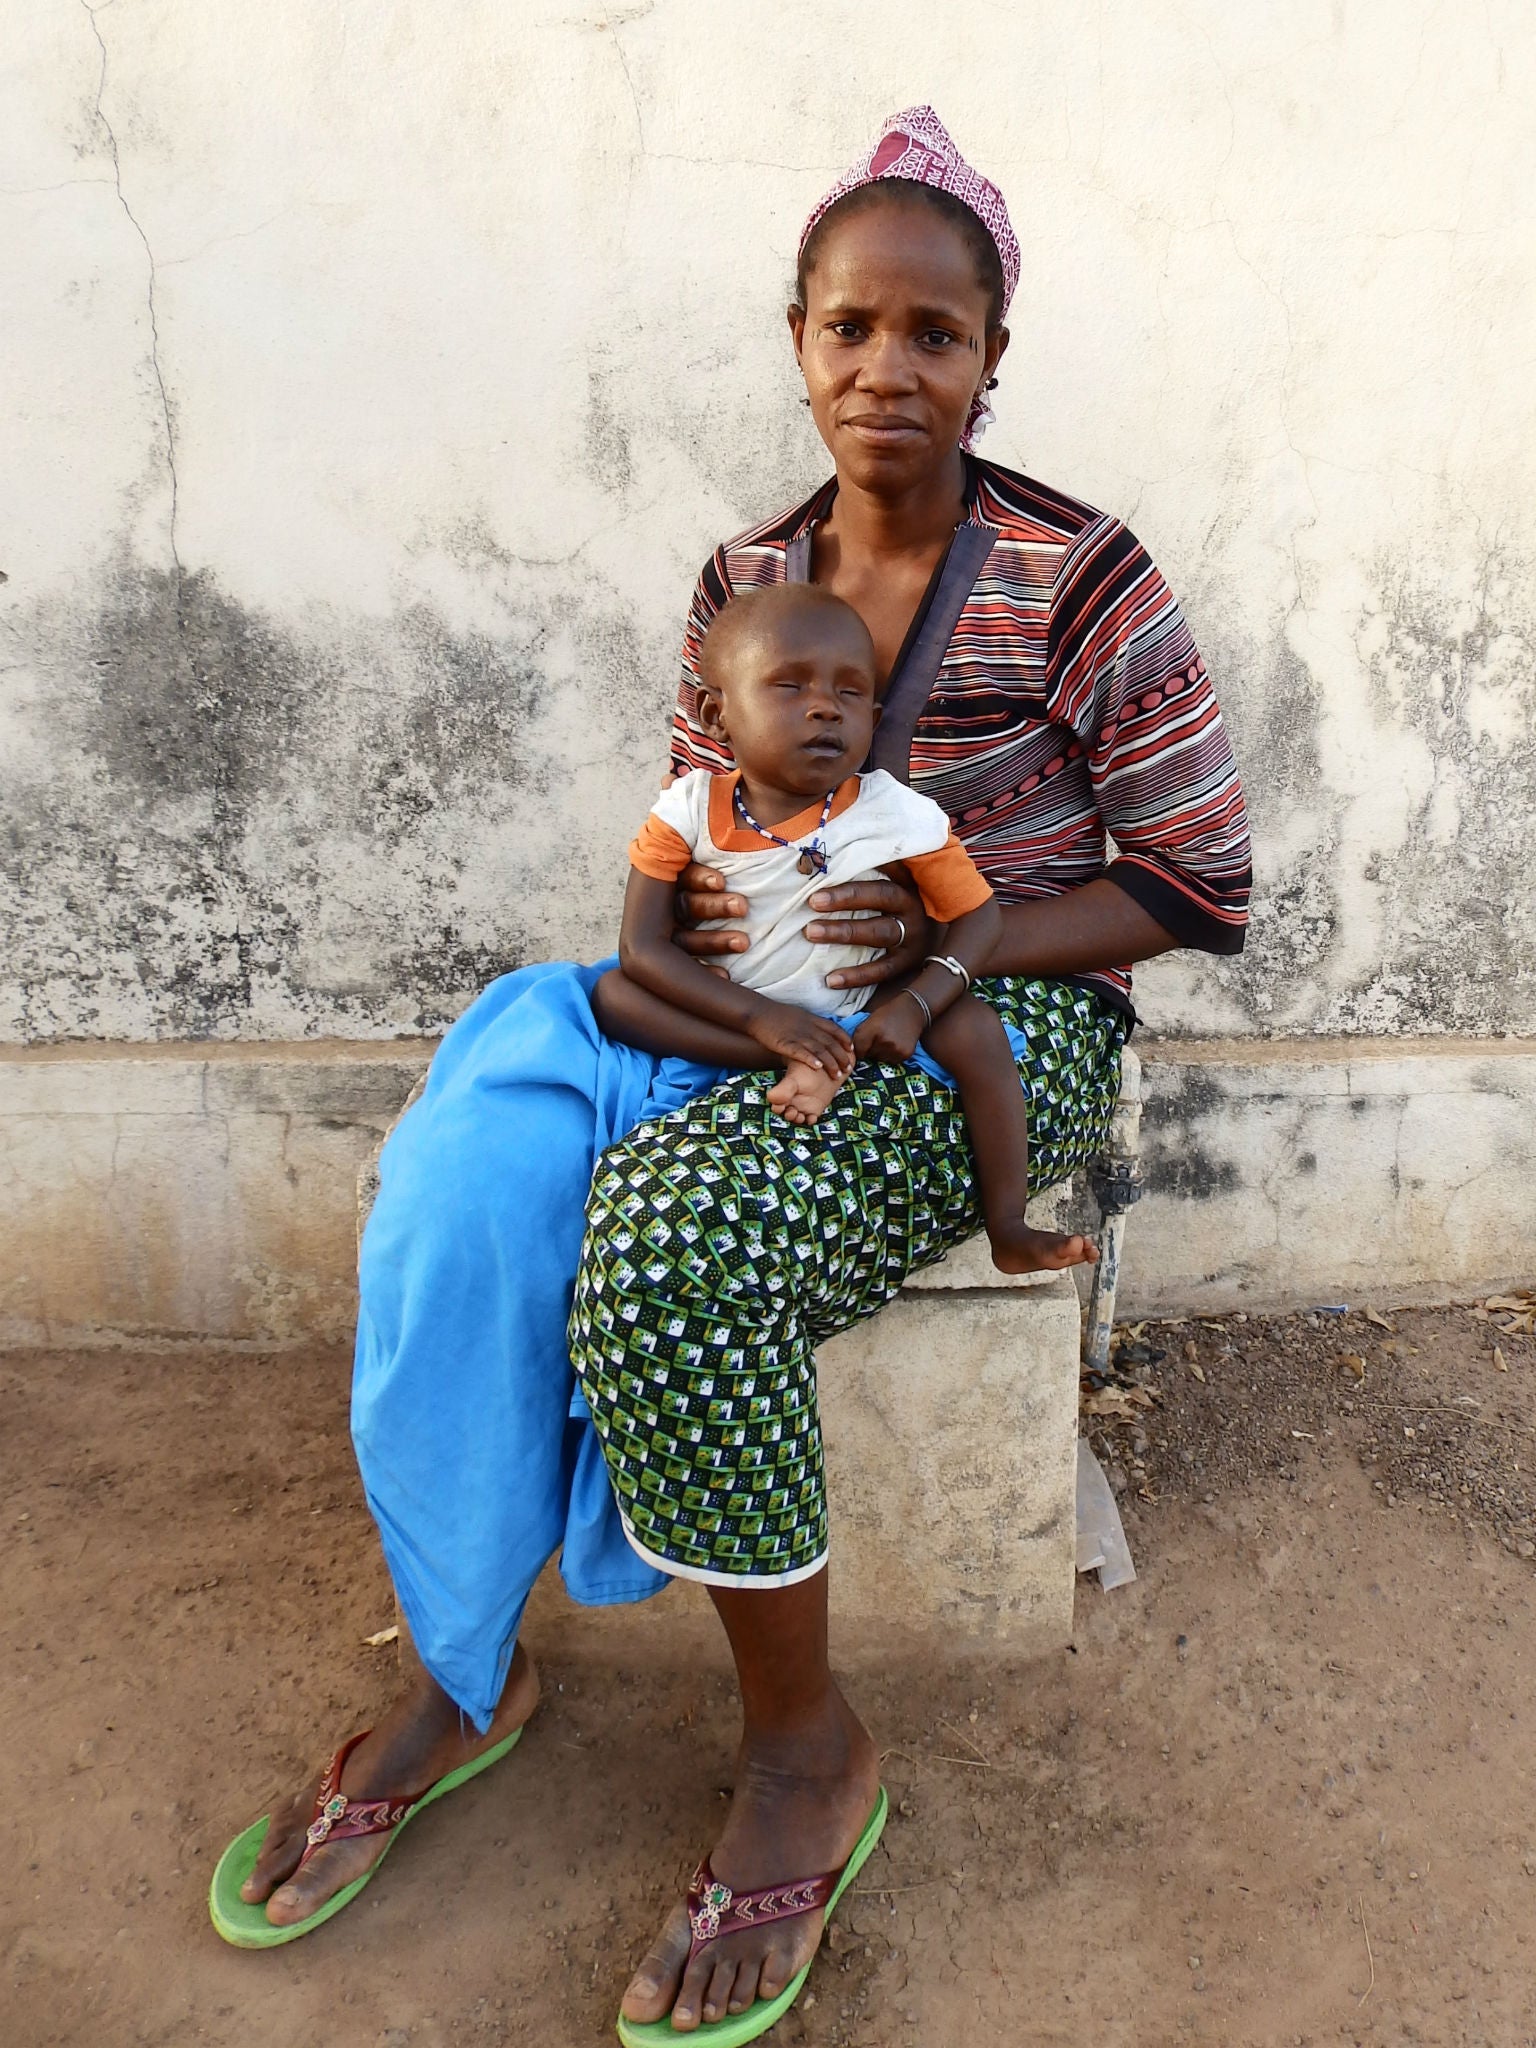 Two-year-old Aura Diane with her mother Oumou Makalo at Kita Hospital, Kita, Mali on 14 March 2016 (Lizzie Dearden)